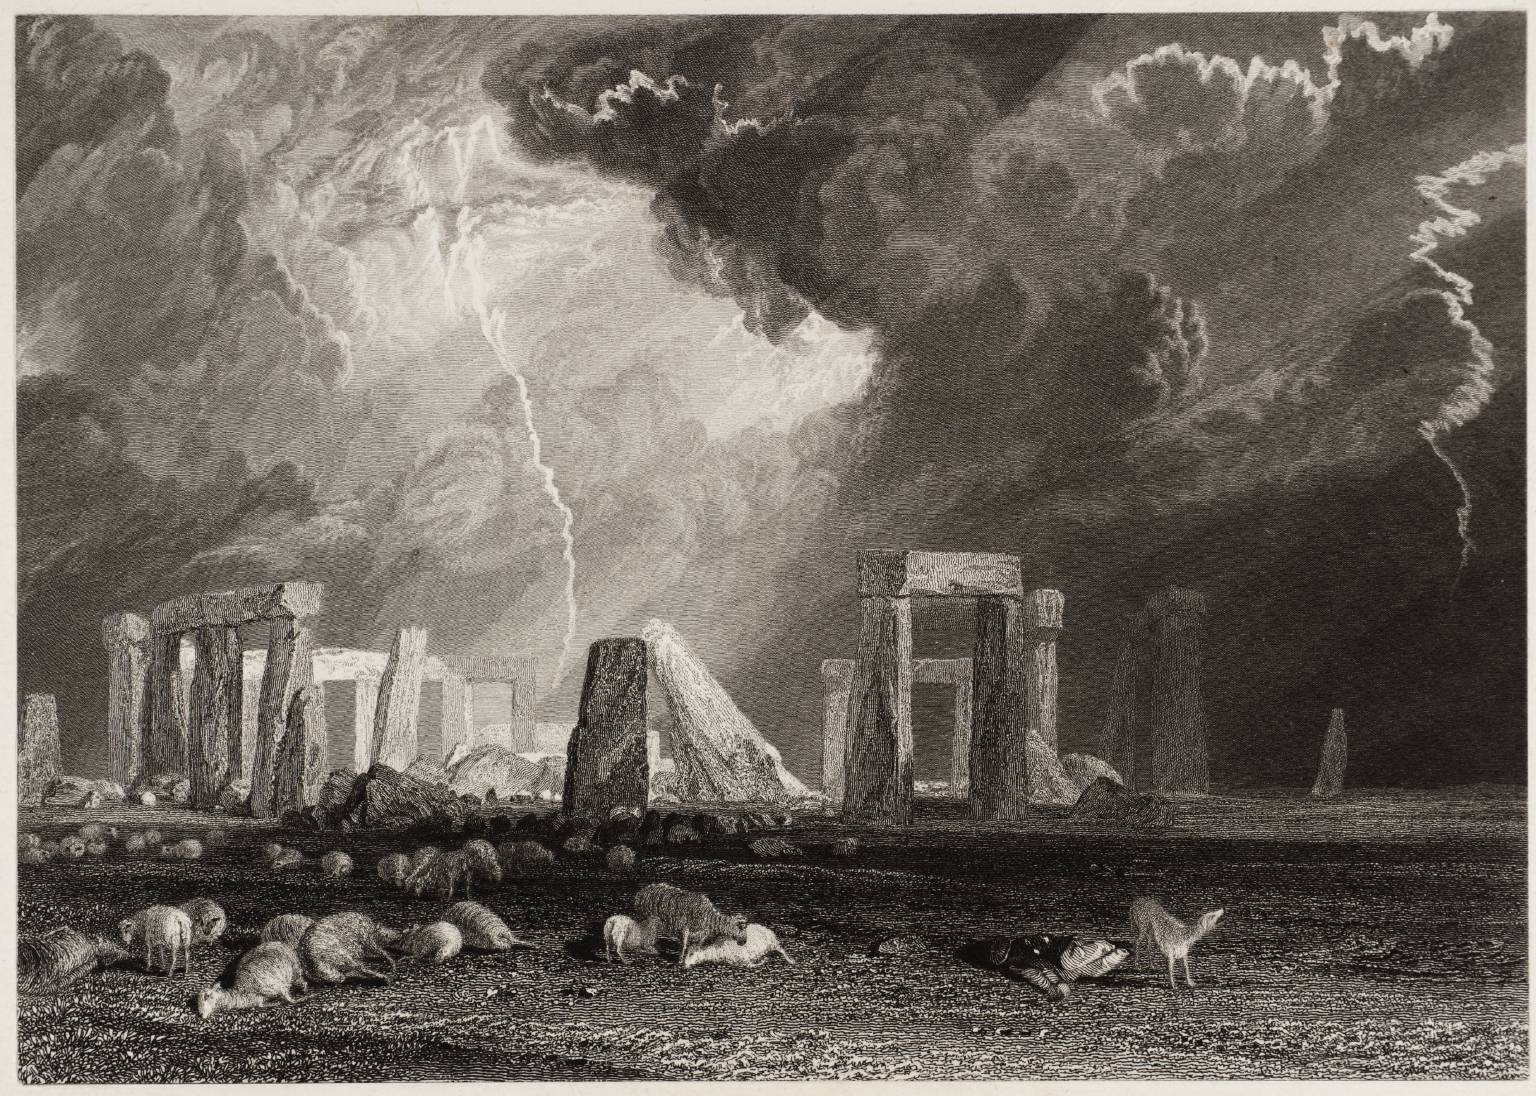 Stone Henge, Wiltshire, engraved by Robert Wallis 1829 by Joseph Mallord William Turner 1775-1851